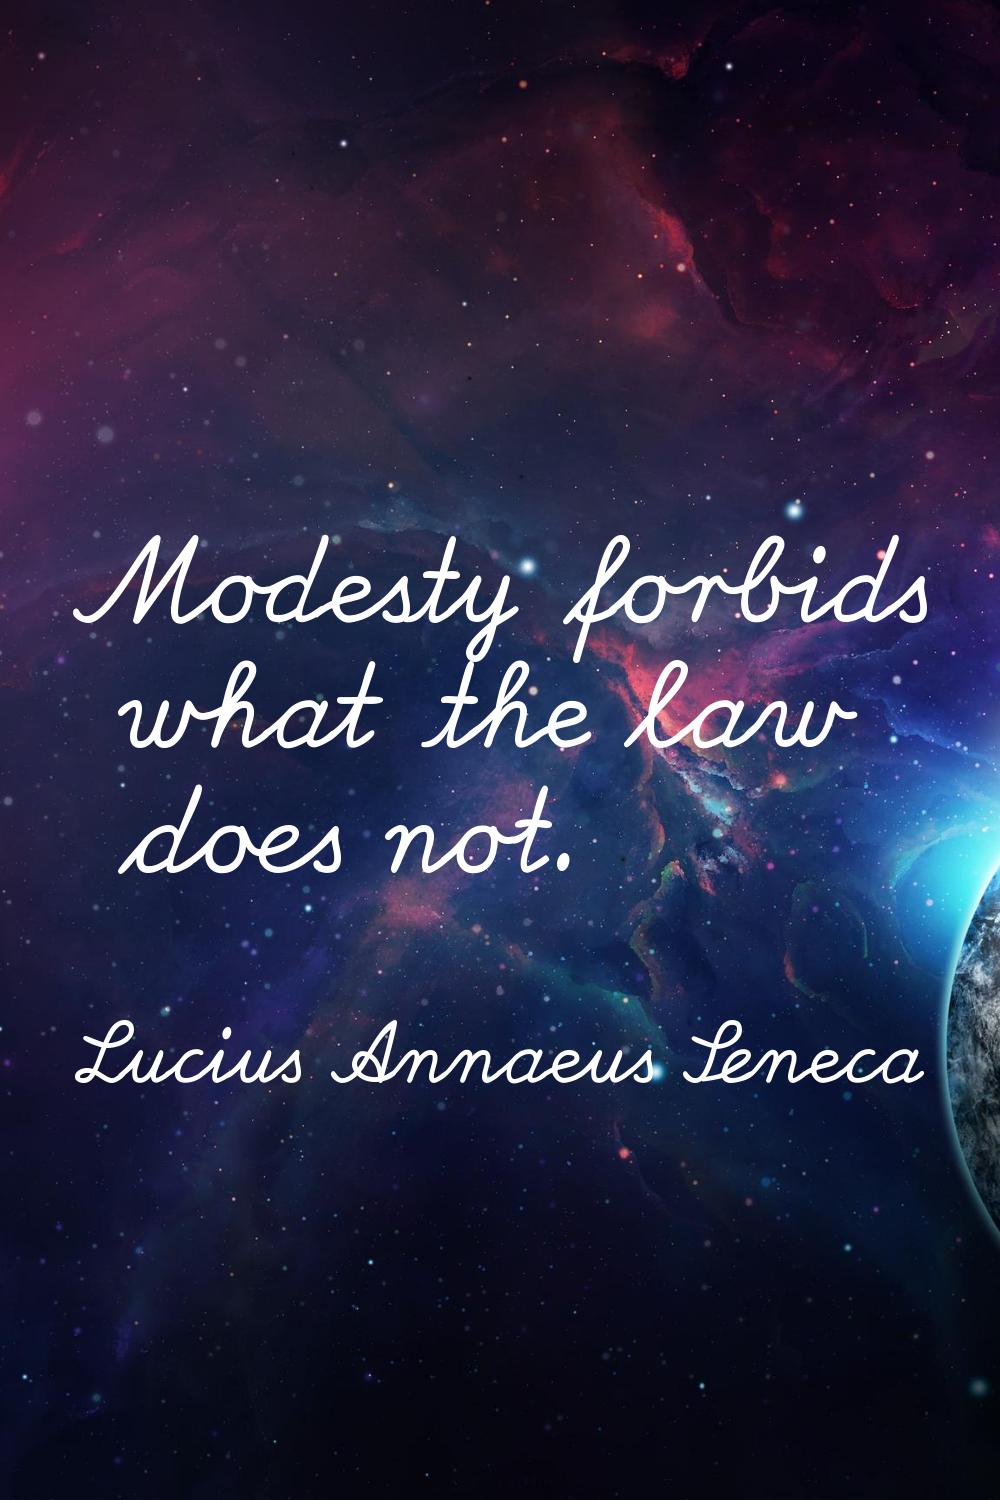 Modesty forbids what the law does not.